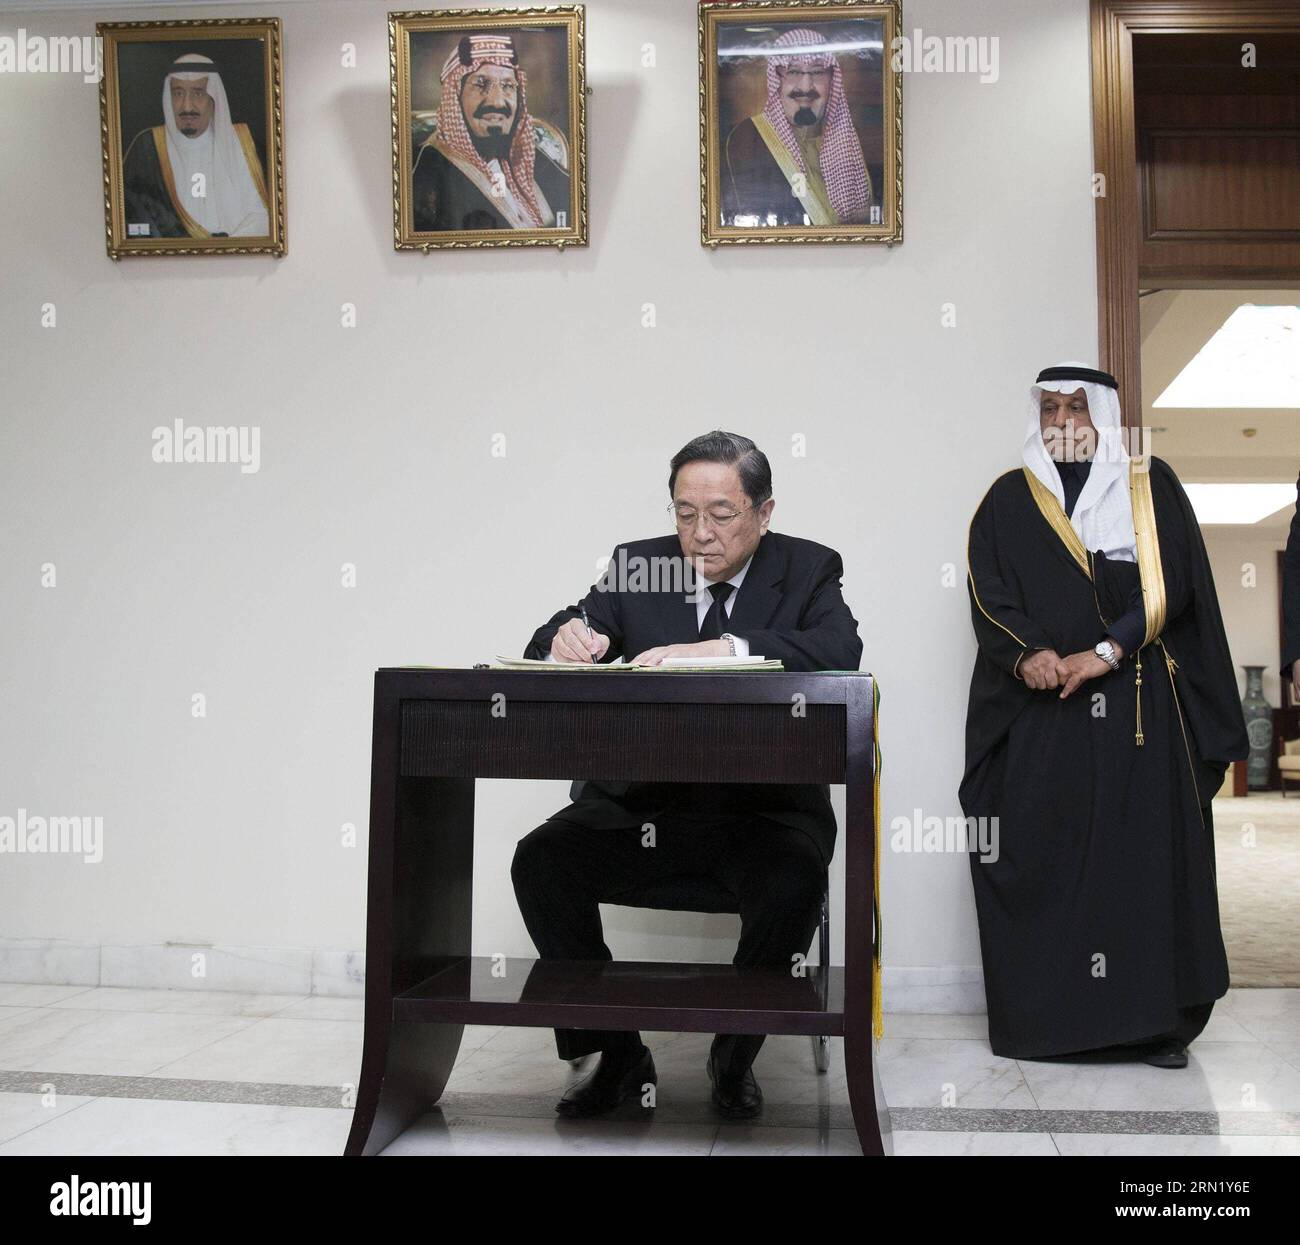 Yu Zhengsheng (L), chairman of the National Committee of the Chinese People s Political Consultative Conference (CPPCC), writes on a condolence book at the embassy of Saudi Arabia in Beijing, capital of China, Jan. 26, 2015. Yu Zhengsheng visited the embassy of Saudi Arabia in Beijing Monday morning to express condolences over the death of King Abdullah bin Abdulaziz. ) (yxb) CHINA-BEIJING-YU ZHENGSHENG-LATE SAUDI KING-MOURNING (CN) HuangxJingwen PUBLICATIONxNOTxINxCHN   Yu Zheng Sheng l Chairman of The National Committee of The Chinese Celebrities S Political Consultative Conference CPPCC wri Stock Photo